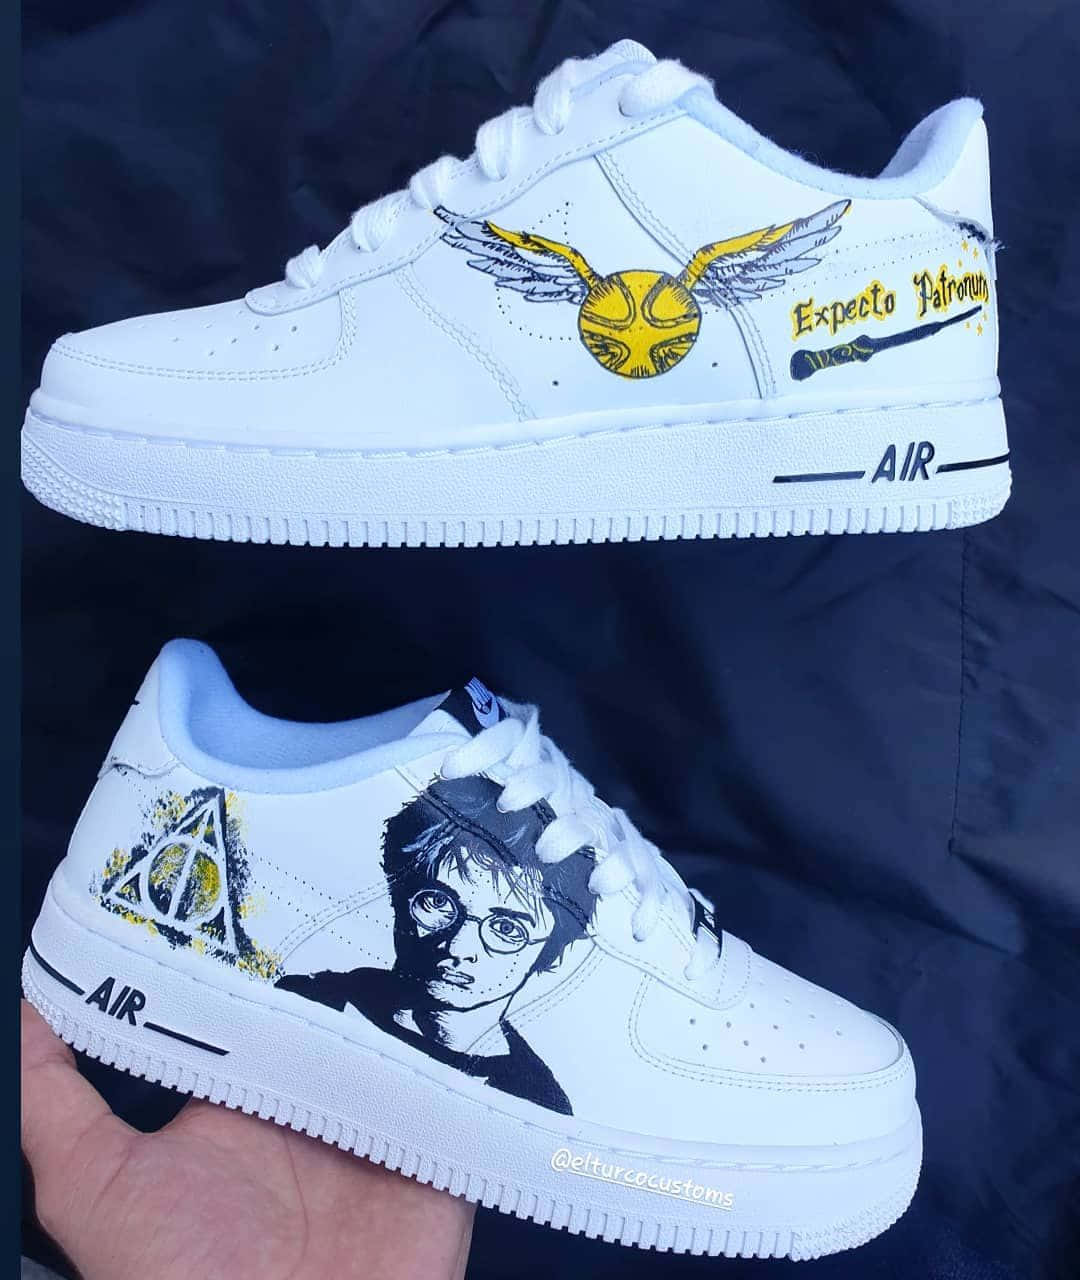 Immaginepersonalizzata Delle Nike Air Force 1 Hype